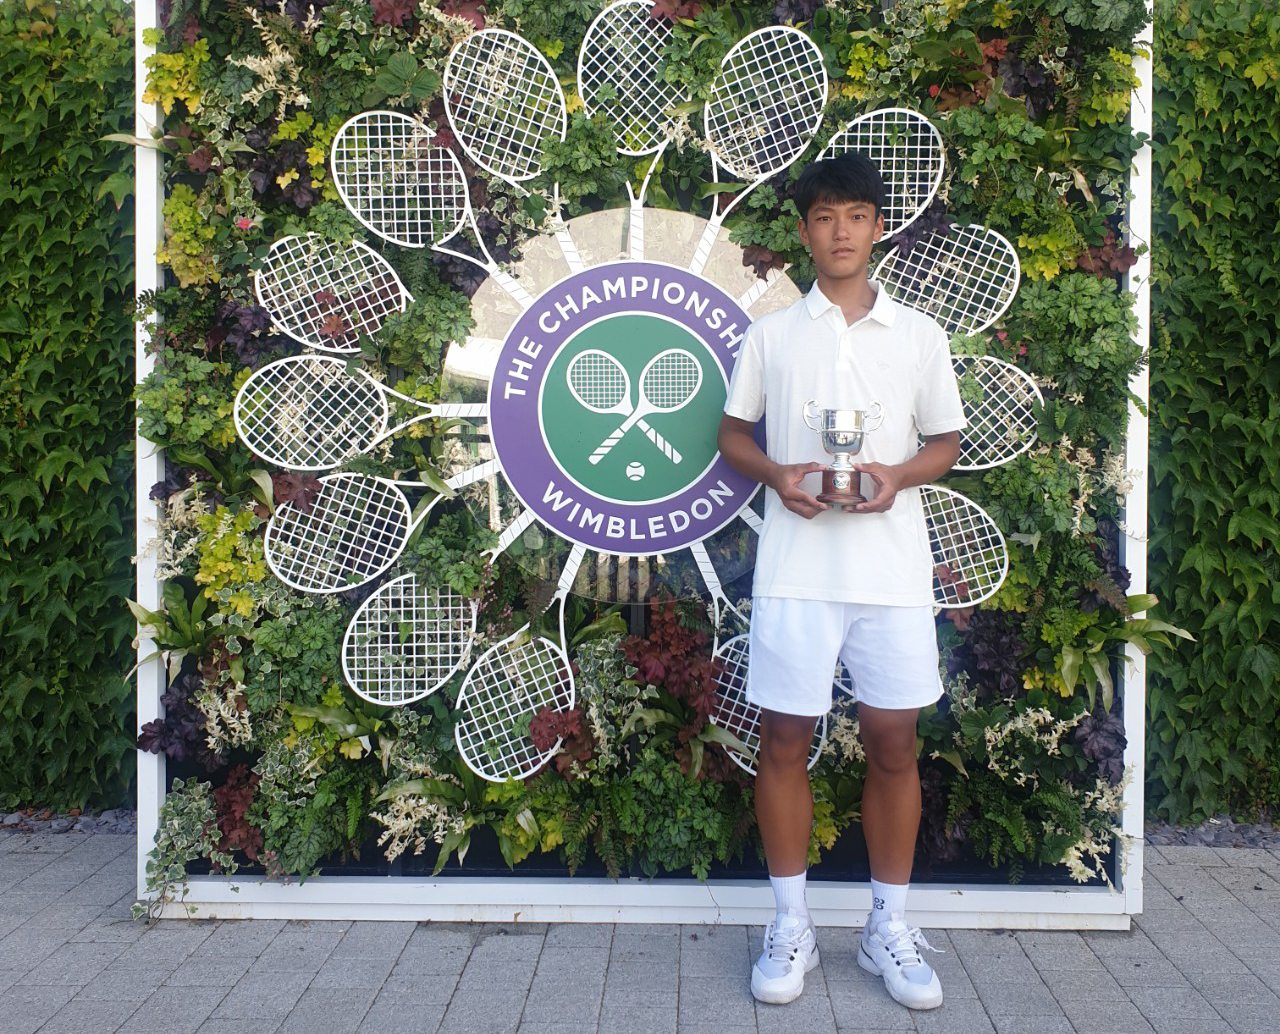 Cho Se-hyuk of South Korea poses with the trophy after winning the boys' 14 & under singles title at Wimbledon at All England Club in London on Sunday, in this photo provided by the Korea Tennis Association. (Yonhap)